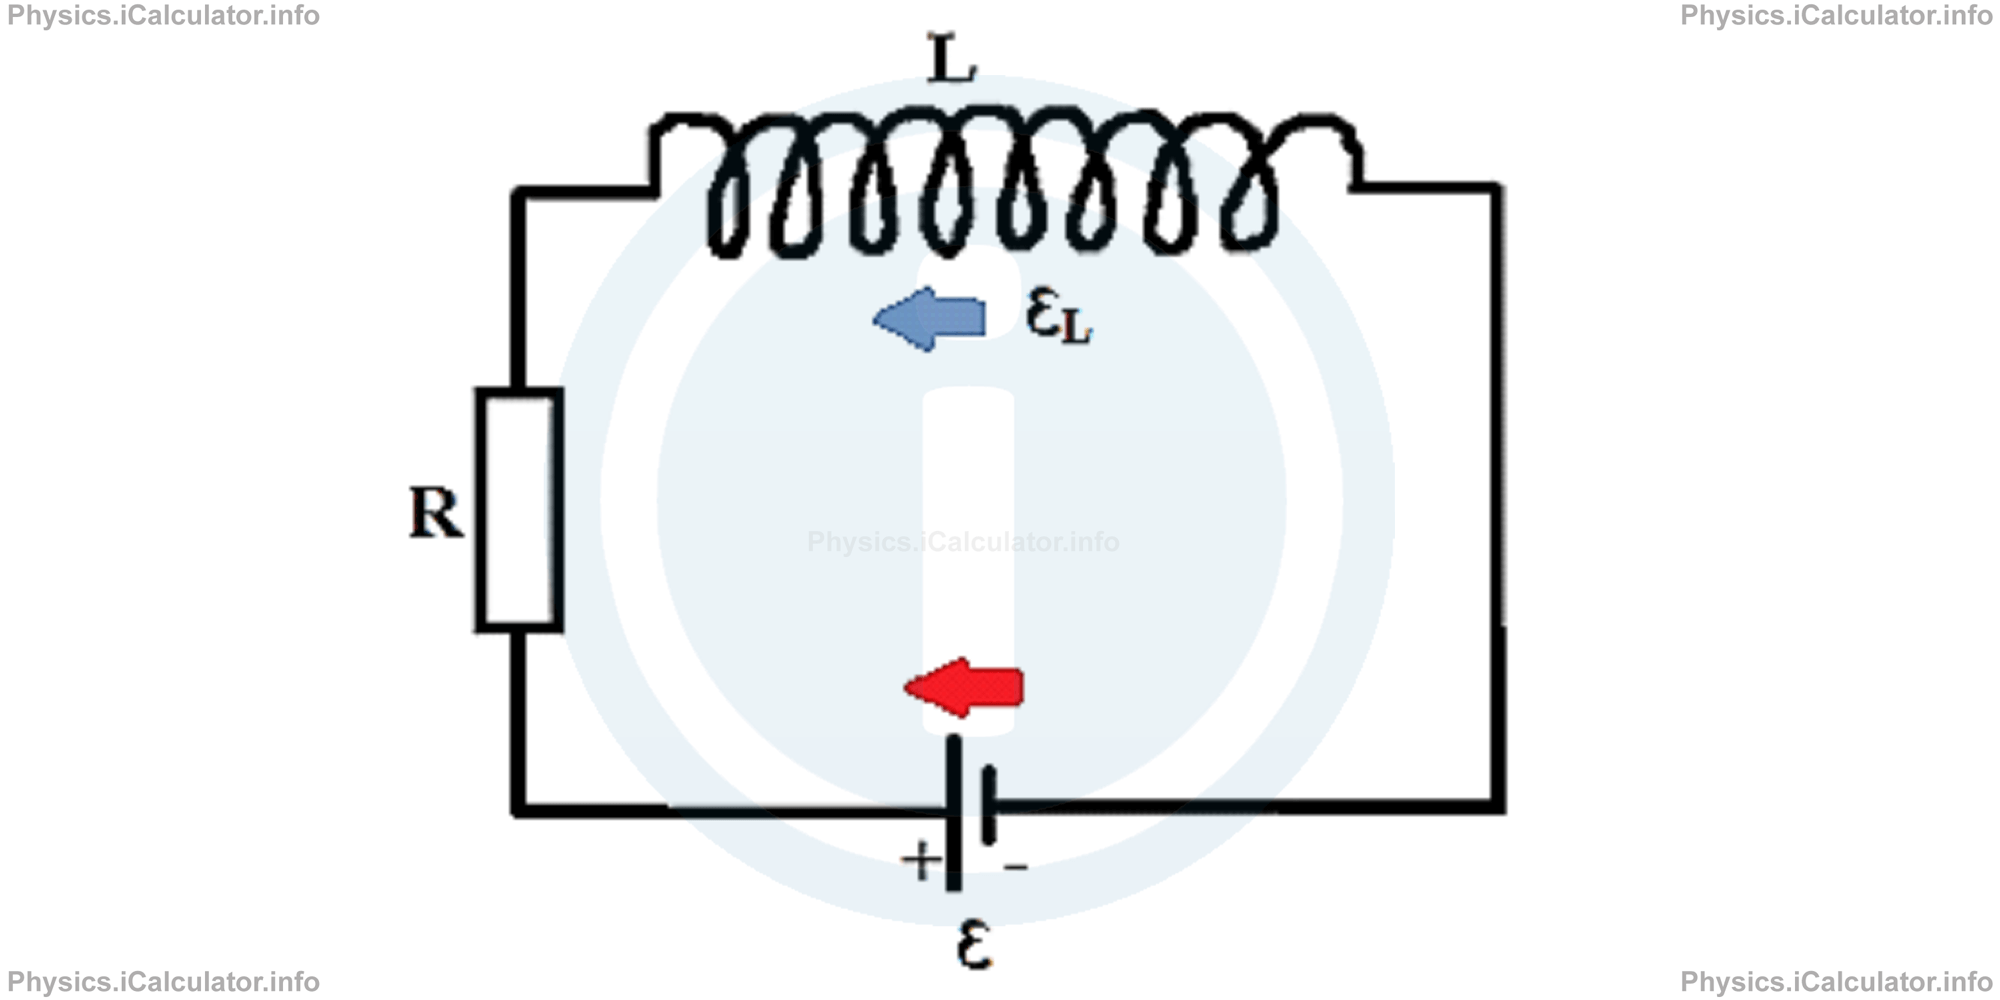 Physics Tutorials: This image provides visual information for the physics tutorial Energy Stored in a Magnetic Field. Energy Density of a Magnetic Field. Mutual Induction 